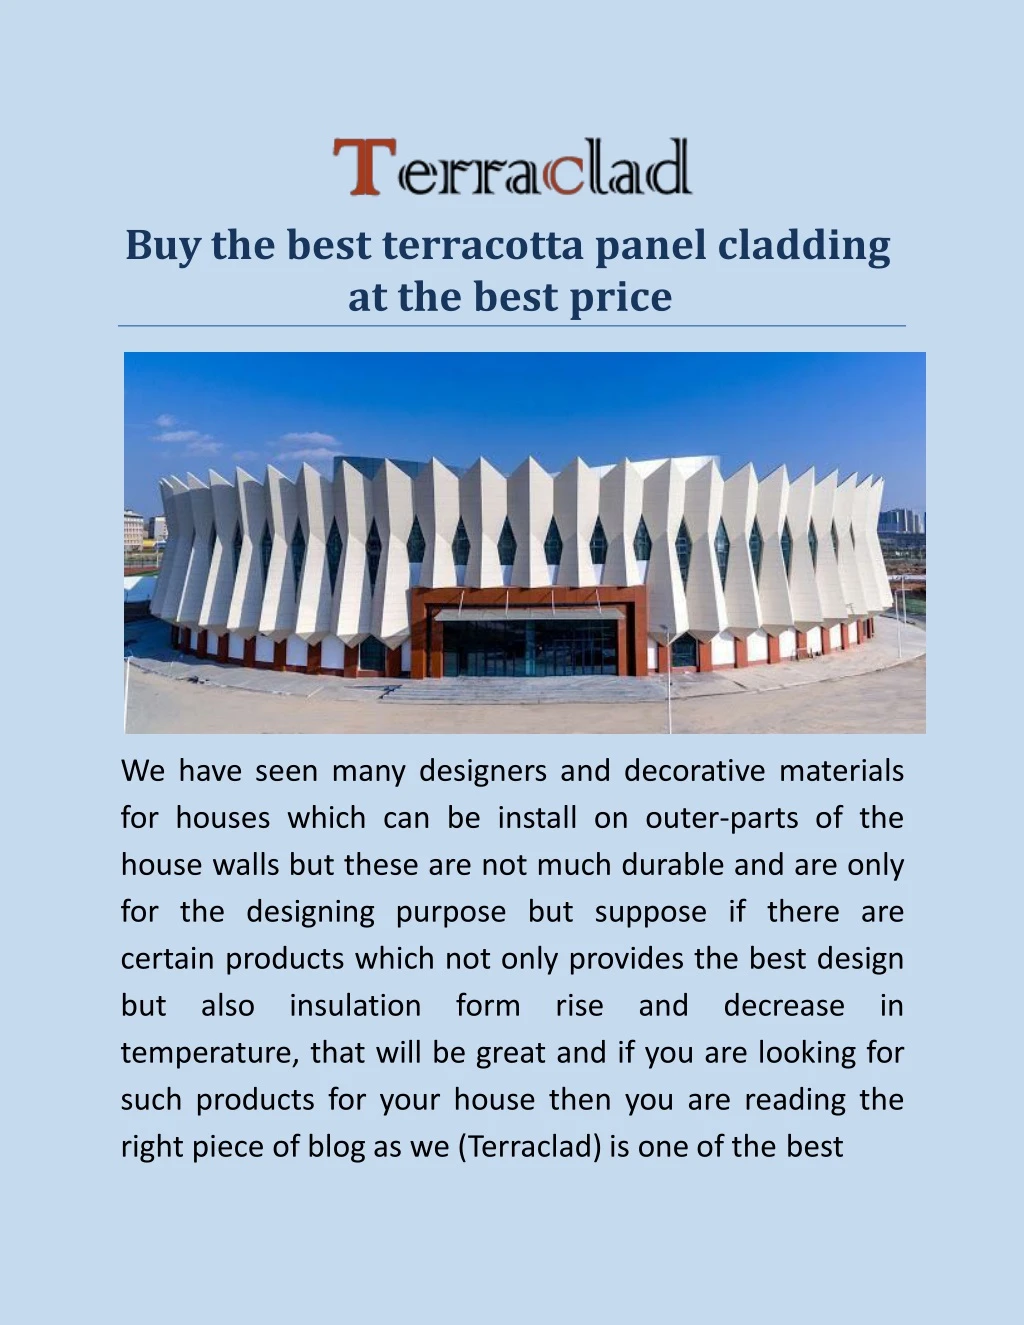 buy the best terracotta panel cladding at the best price